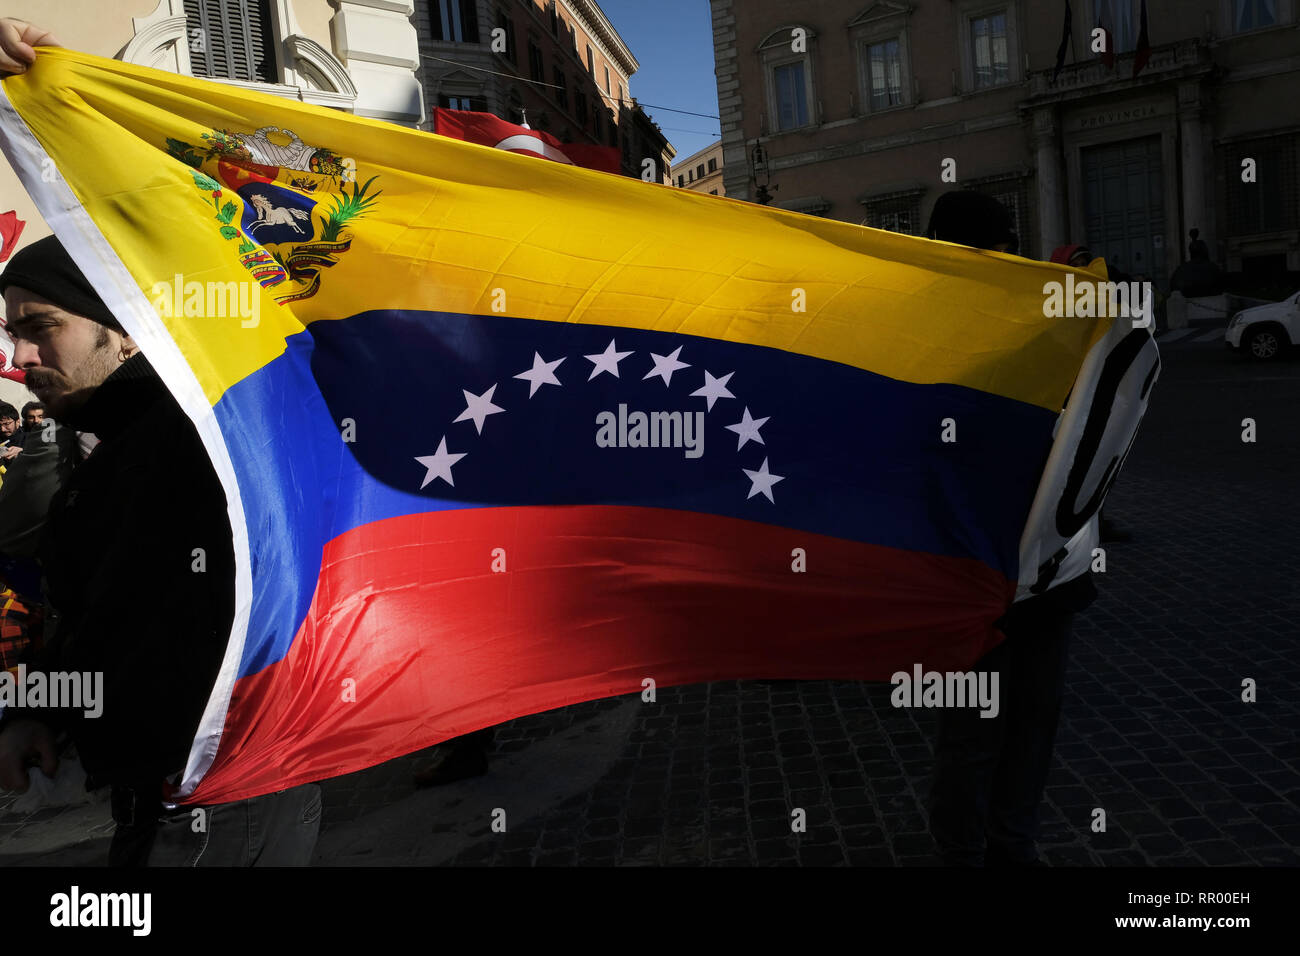 Rome, Italy. 23rd Feb, 2019. Demonstrations in favor of Nicolas Maduro. The protesters waving flags of the PCI (Italian Communist Party) shouting that in Venezuela there is no dictatorship but oil. During the event a flag of the European community was soiled with oil and tomato sauce to represent blood. Credit: Danilo Balducci/ZUMA Wire/Alamy Live News Stock Photo